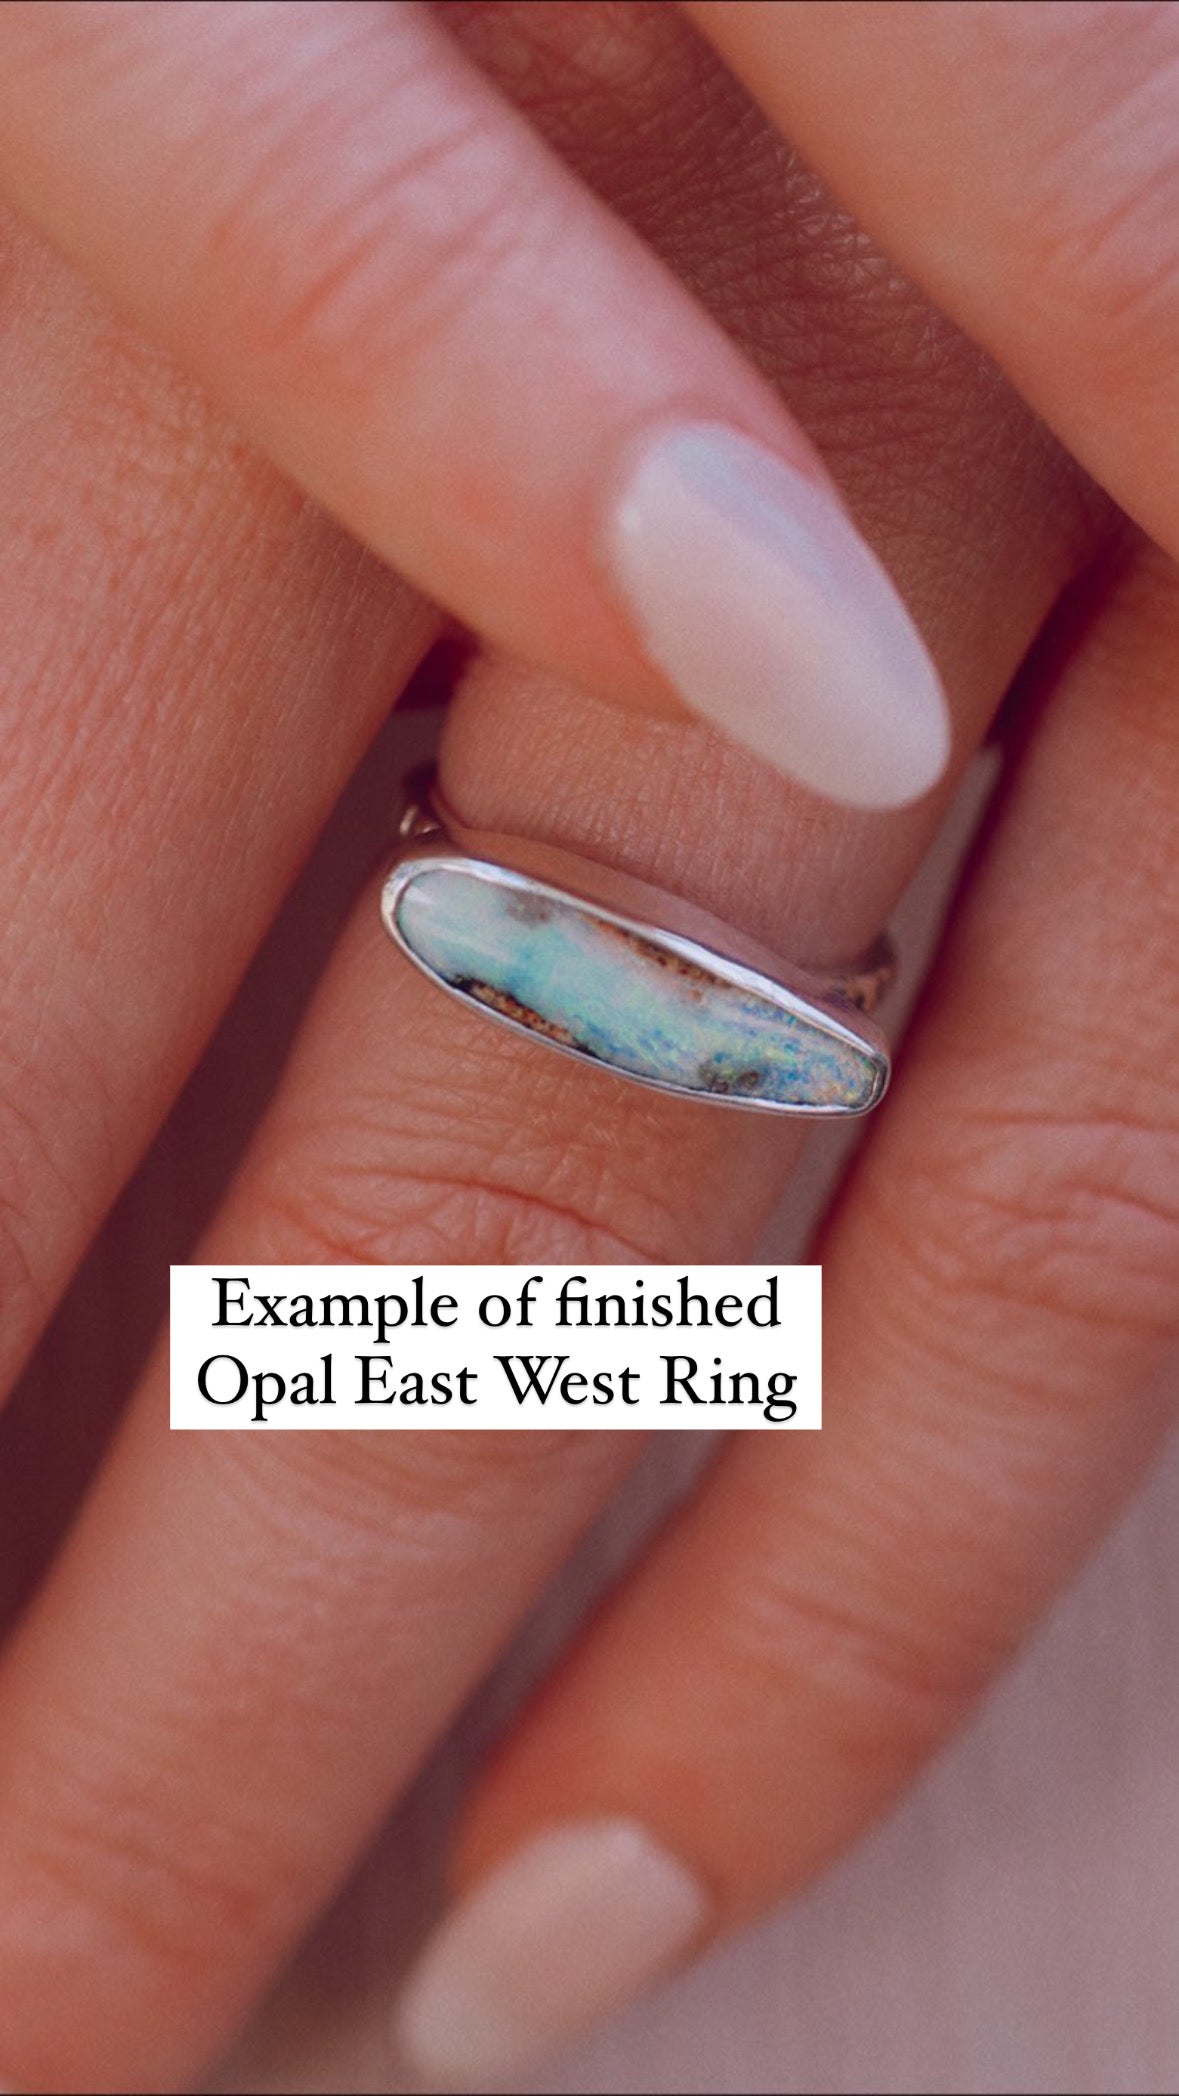 Opal East West Ring #1 (Pre-Order) ◇ Australian Opal ◇ Made in your size